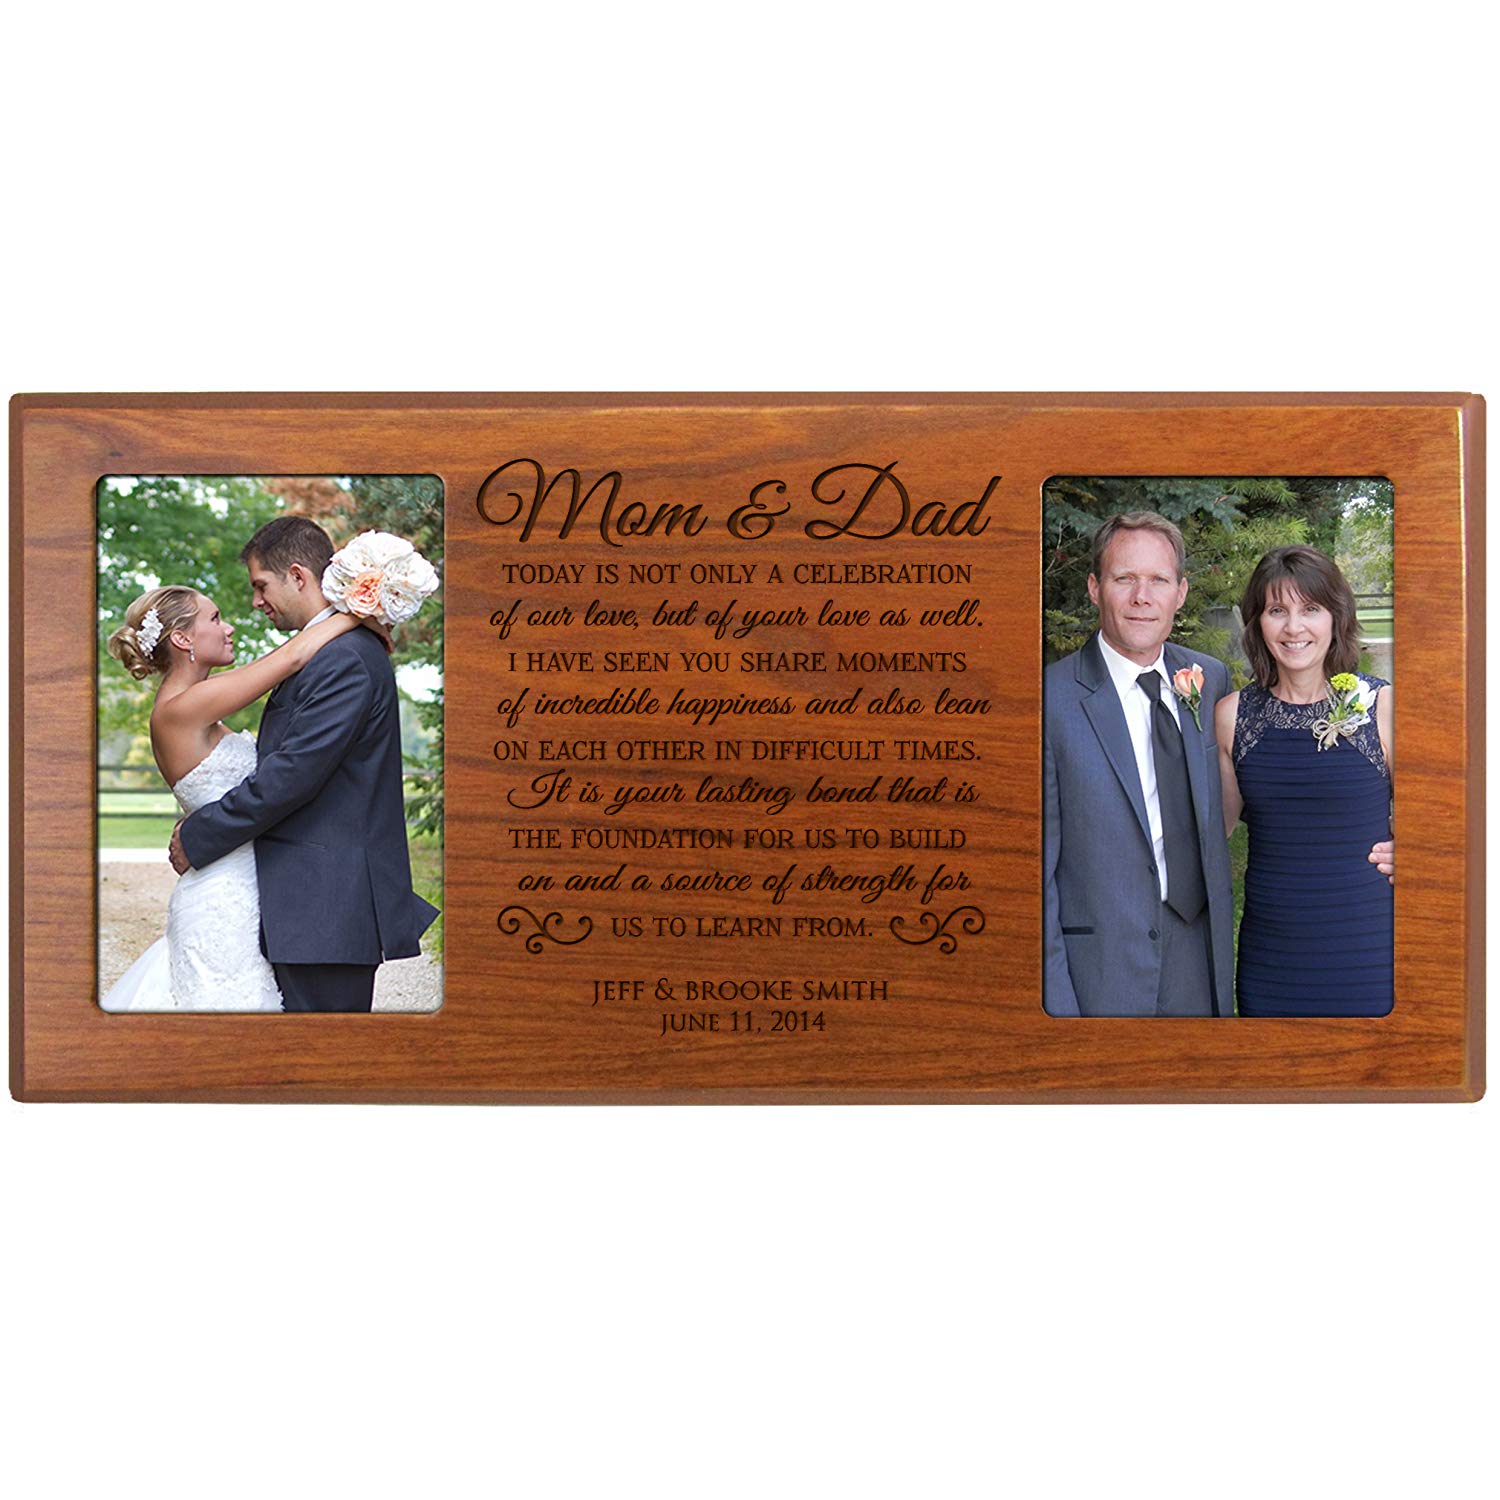 Personalized Parent Wedding Double Picture Frame Gift - Mom & Dad - LifeSong Milestones